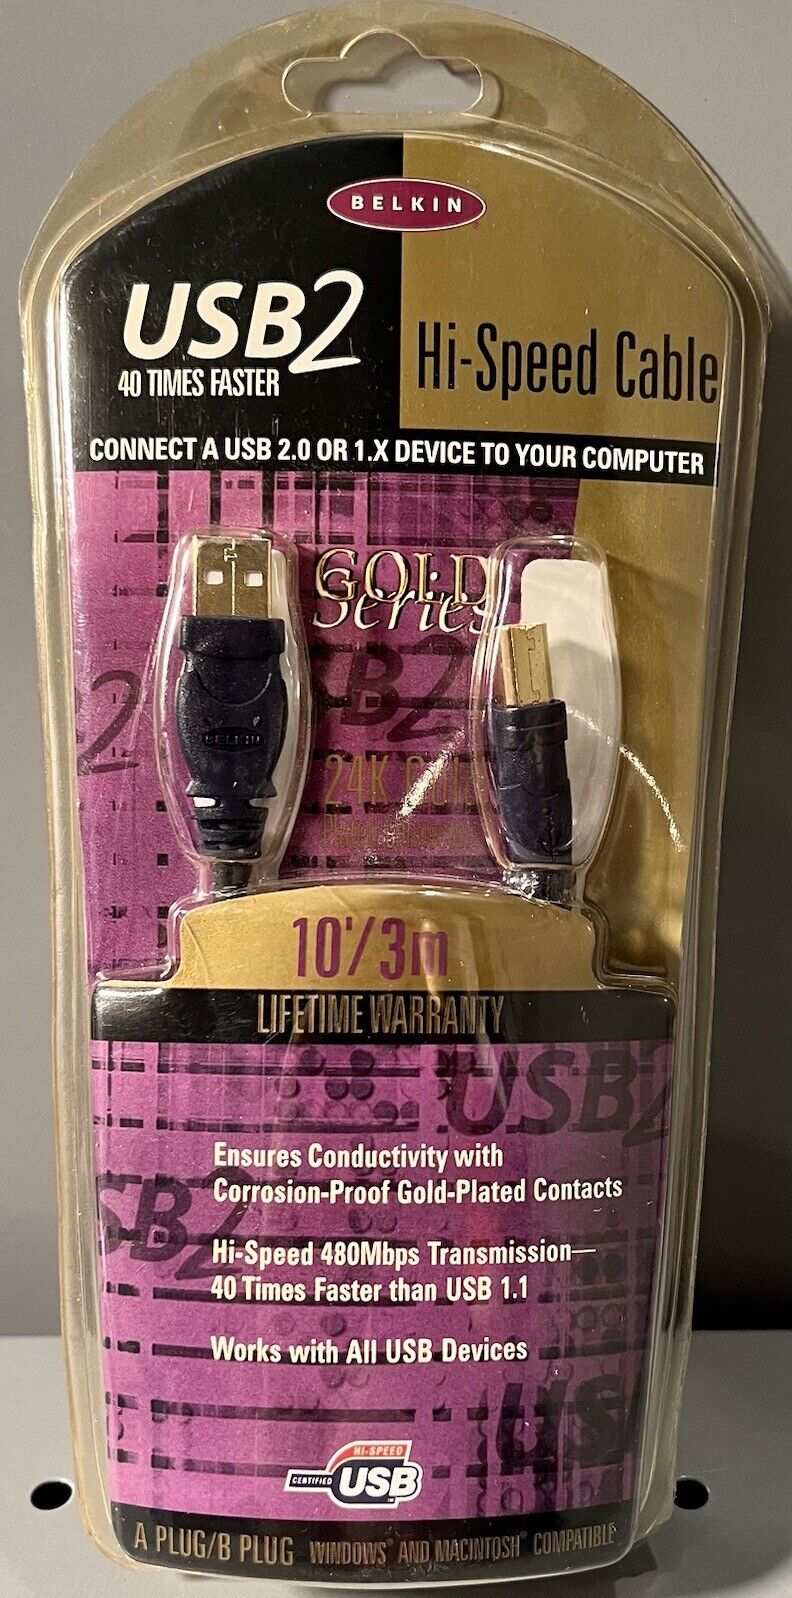 Belkin Gold Series High-Speed USB 2.0 Cable - 10 ft. - Black - Brand New Sealed